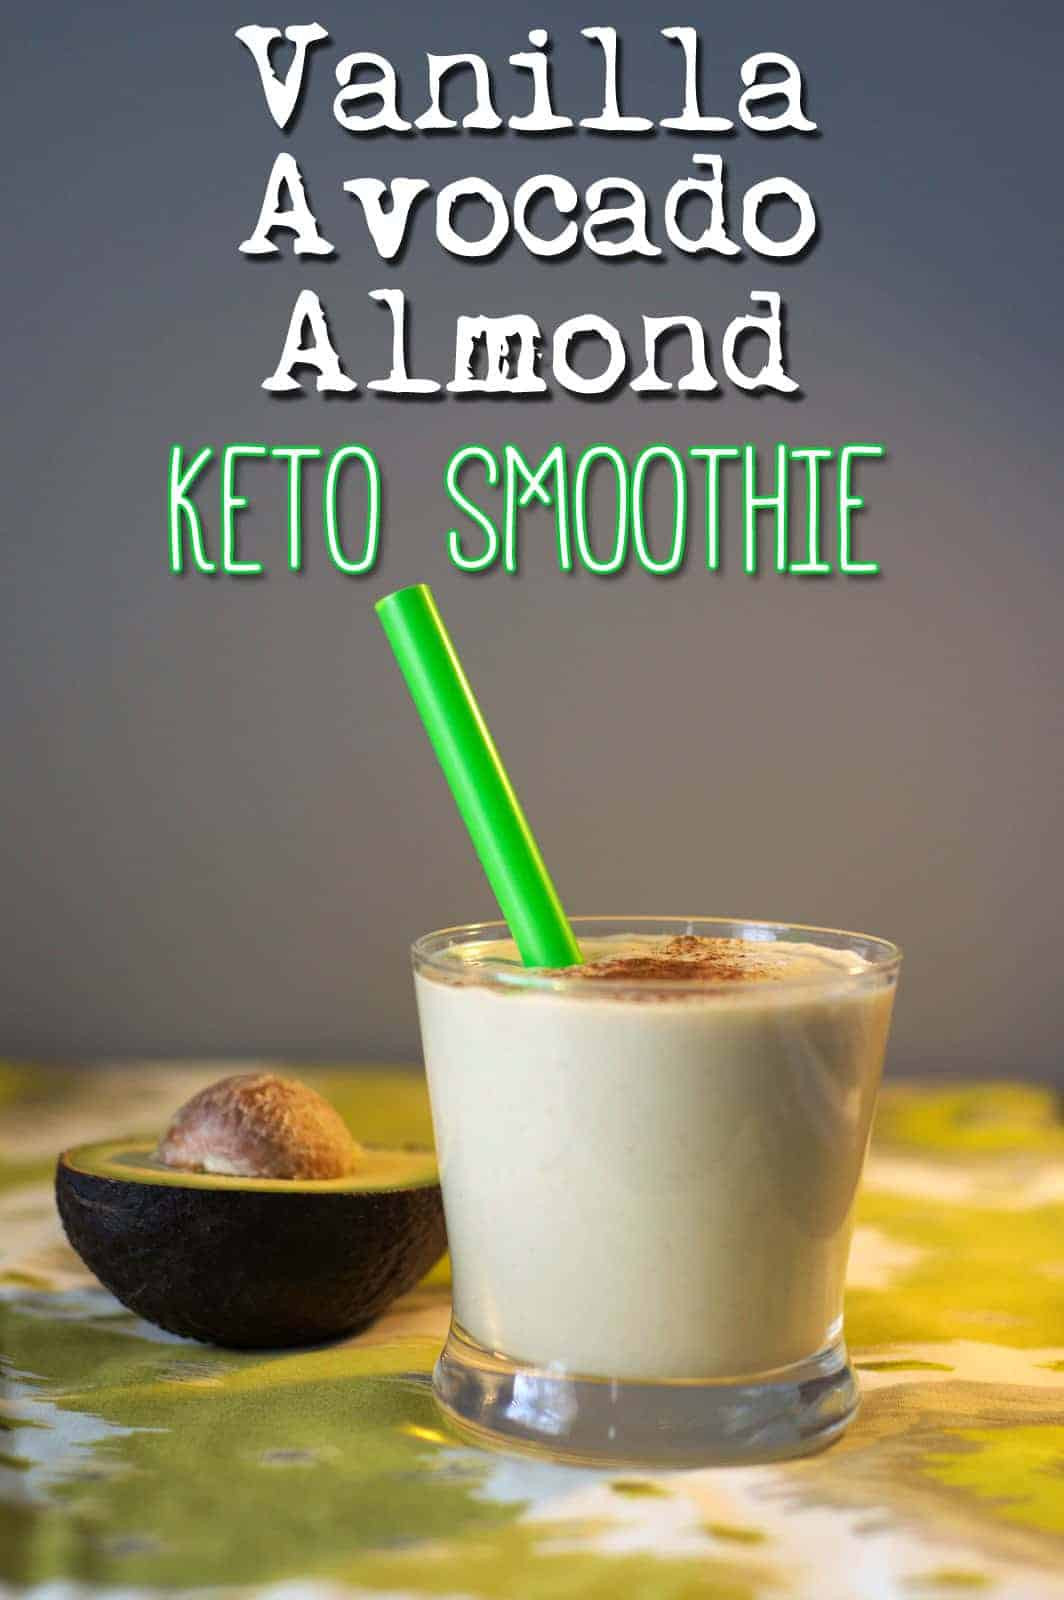 Healthy Low Carb Smoothies
 50 Best Low Carb Smoothie Recipes for 2018